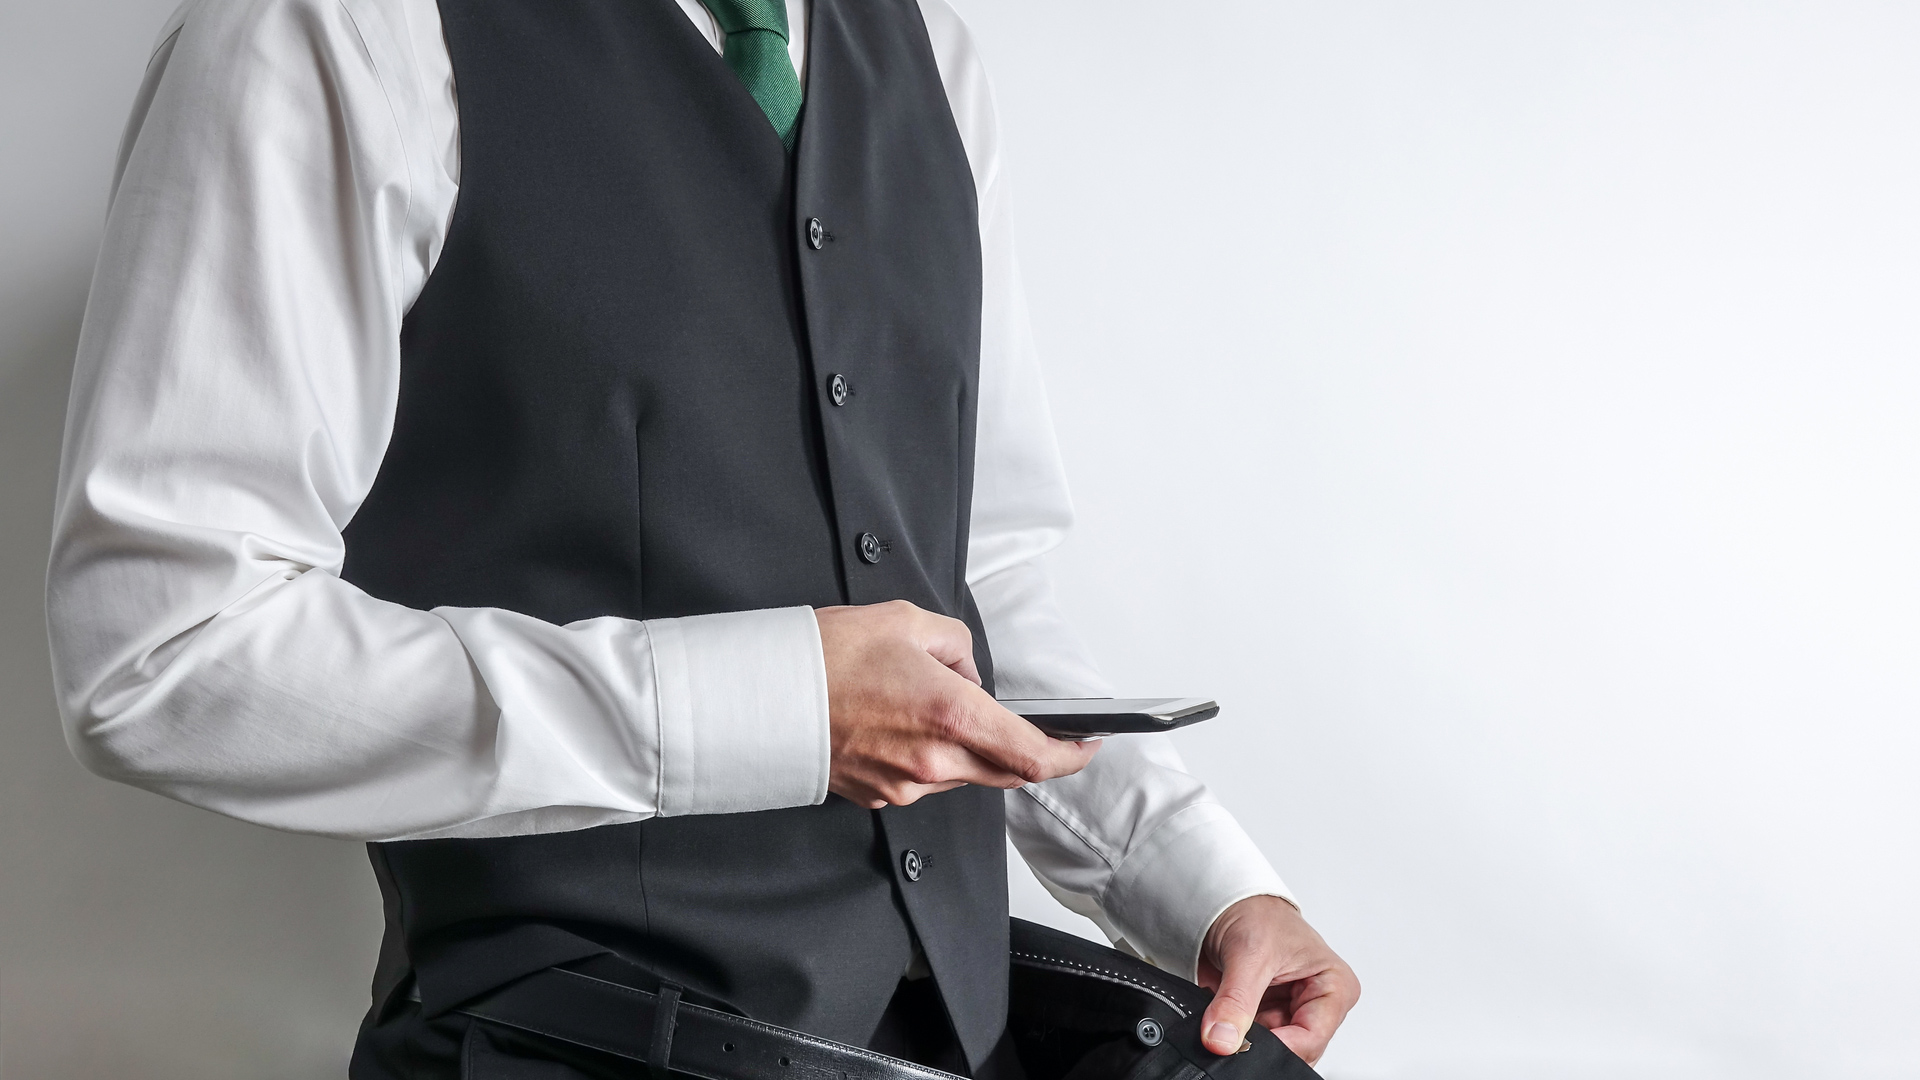 Man in a suit with green tie, holding his trousers open and his phone towards his crotch taking a picture.